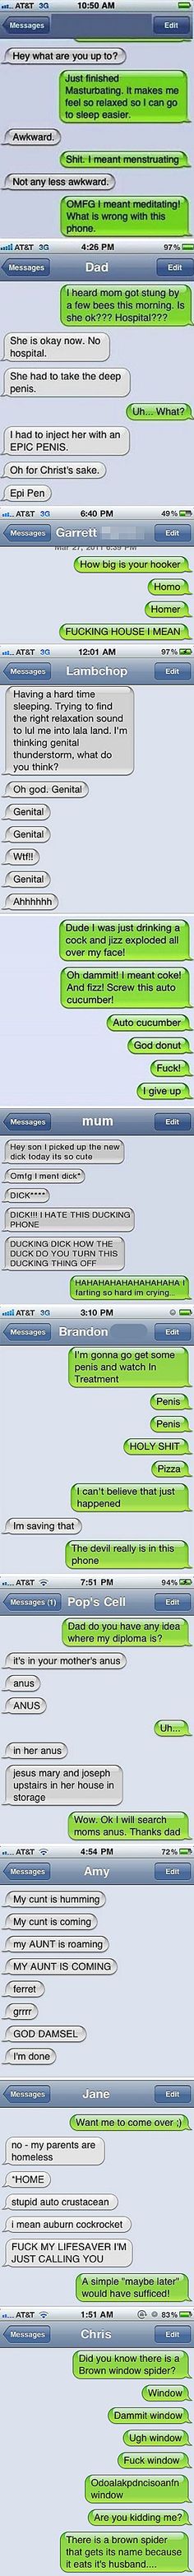 Funny images of the week, 82 images. Autocorrect Fail Compilation Funny Texts, Texts, Funny Text Messages, #fails, Text Messages